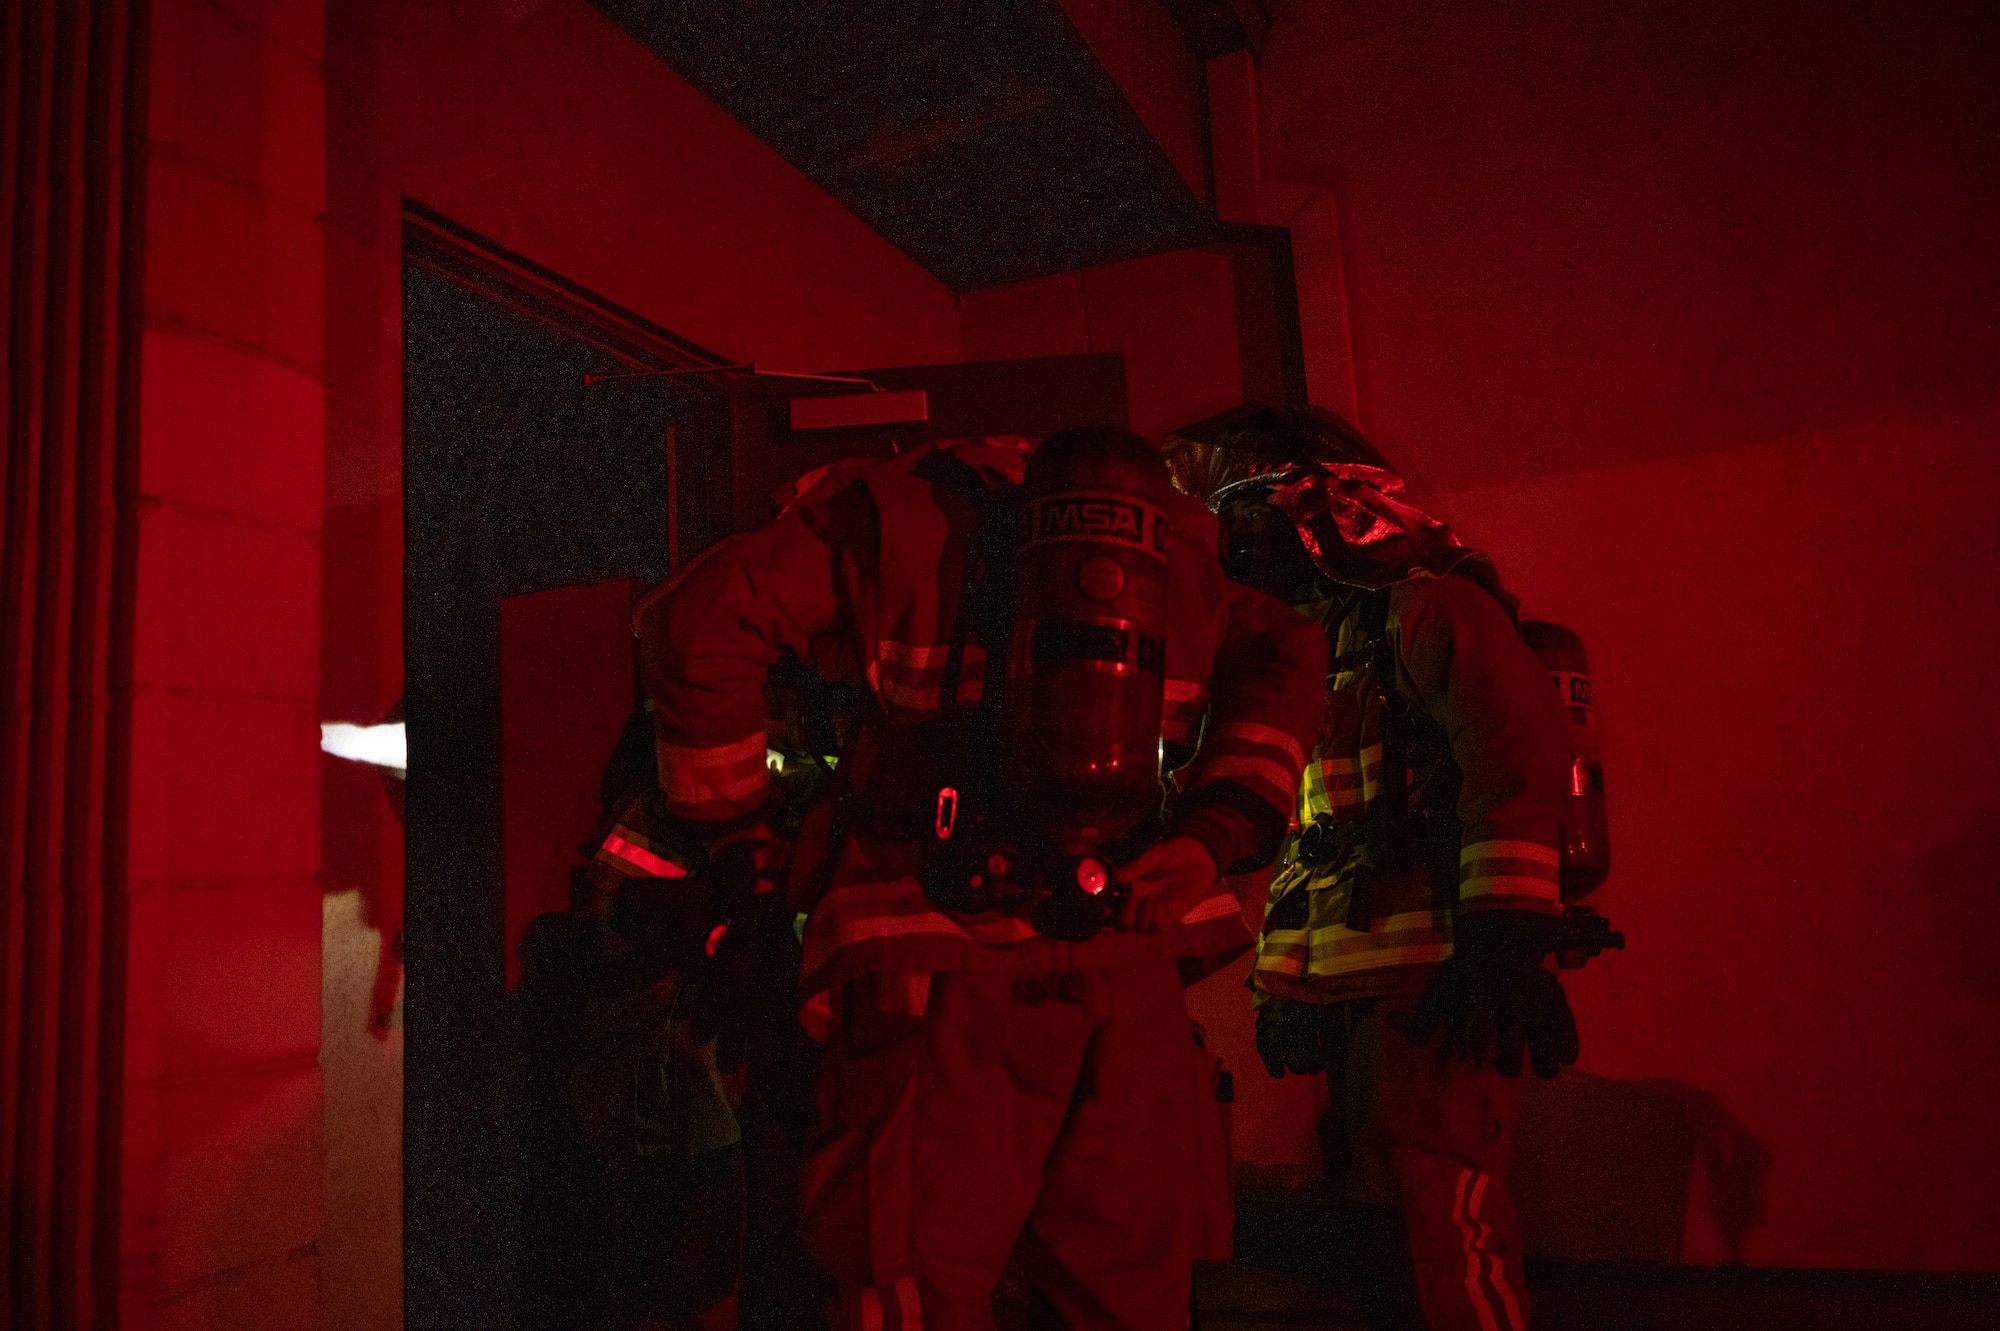 U.S. Air Force Firefighters assigned to the 51st Civil Engineer Squadron (CES), prepare to enter a building during a fire response training scenario at Osan Air Base, Republic of Korea, Sept. 14, 2022.